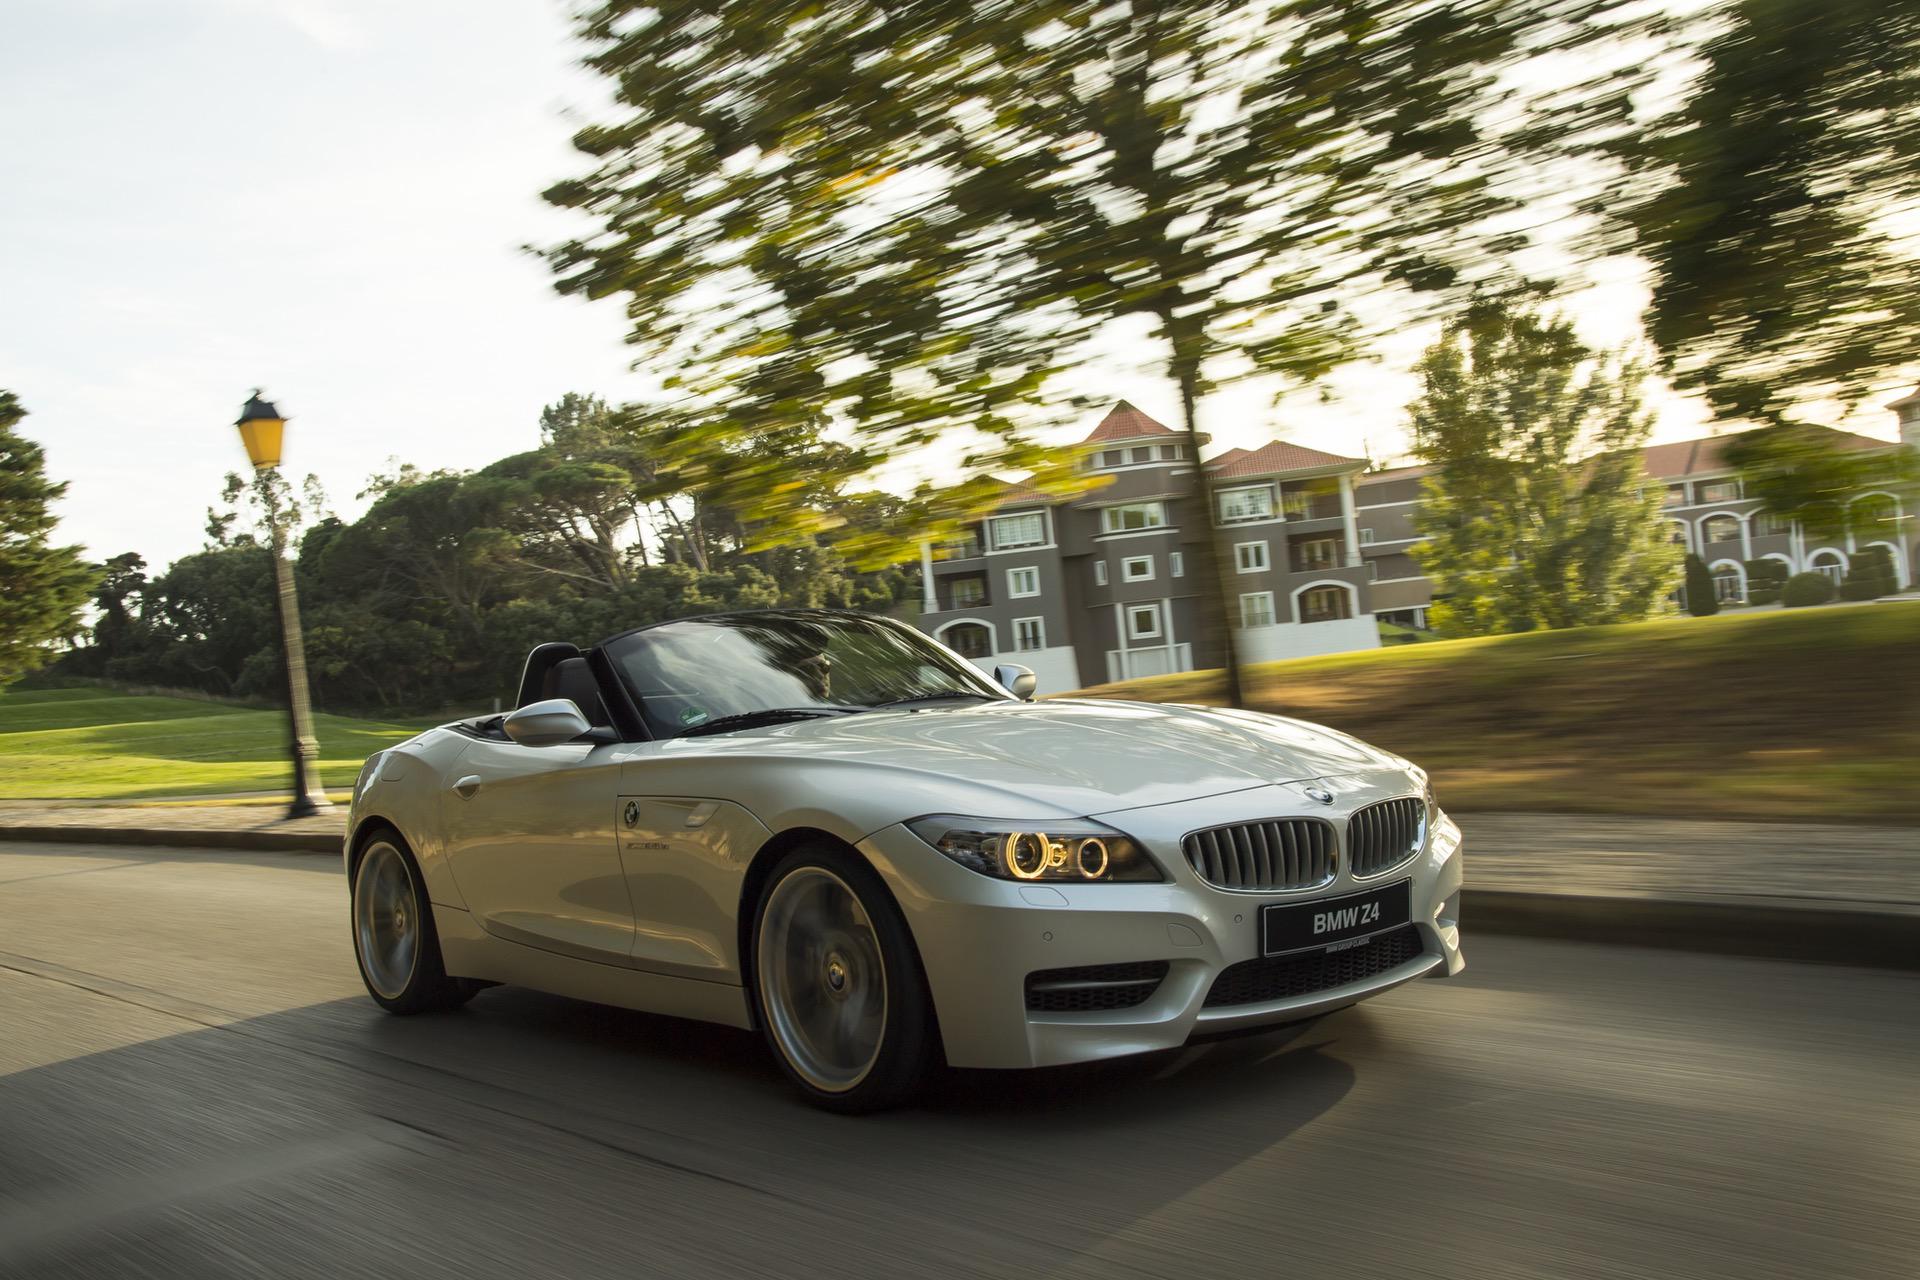 BMW E89 Z4 Roadster images 05